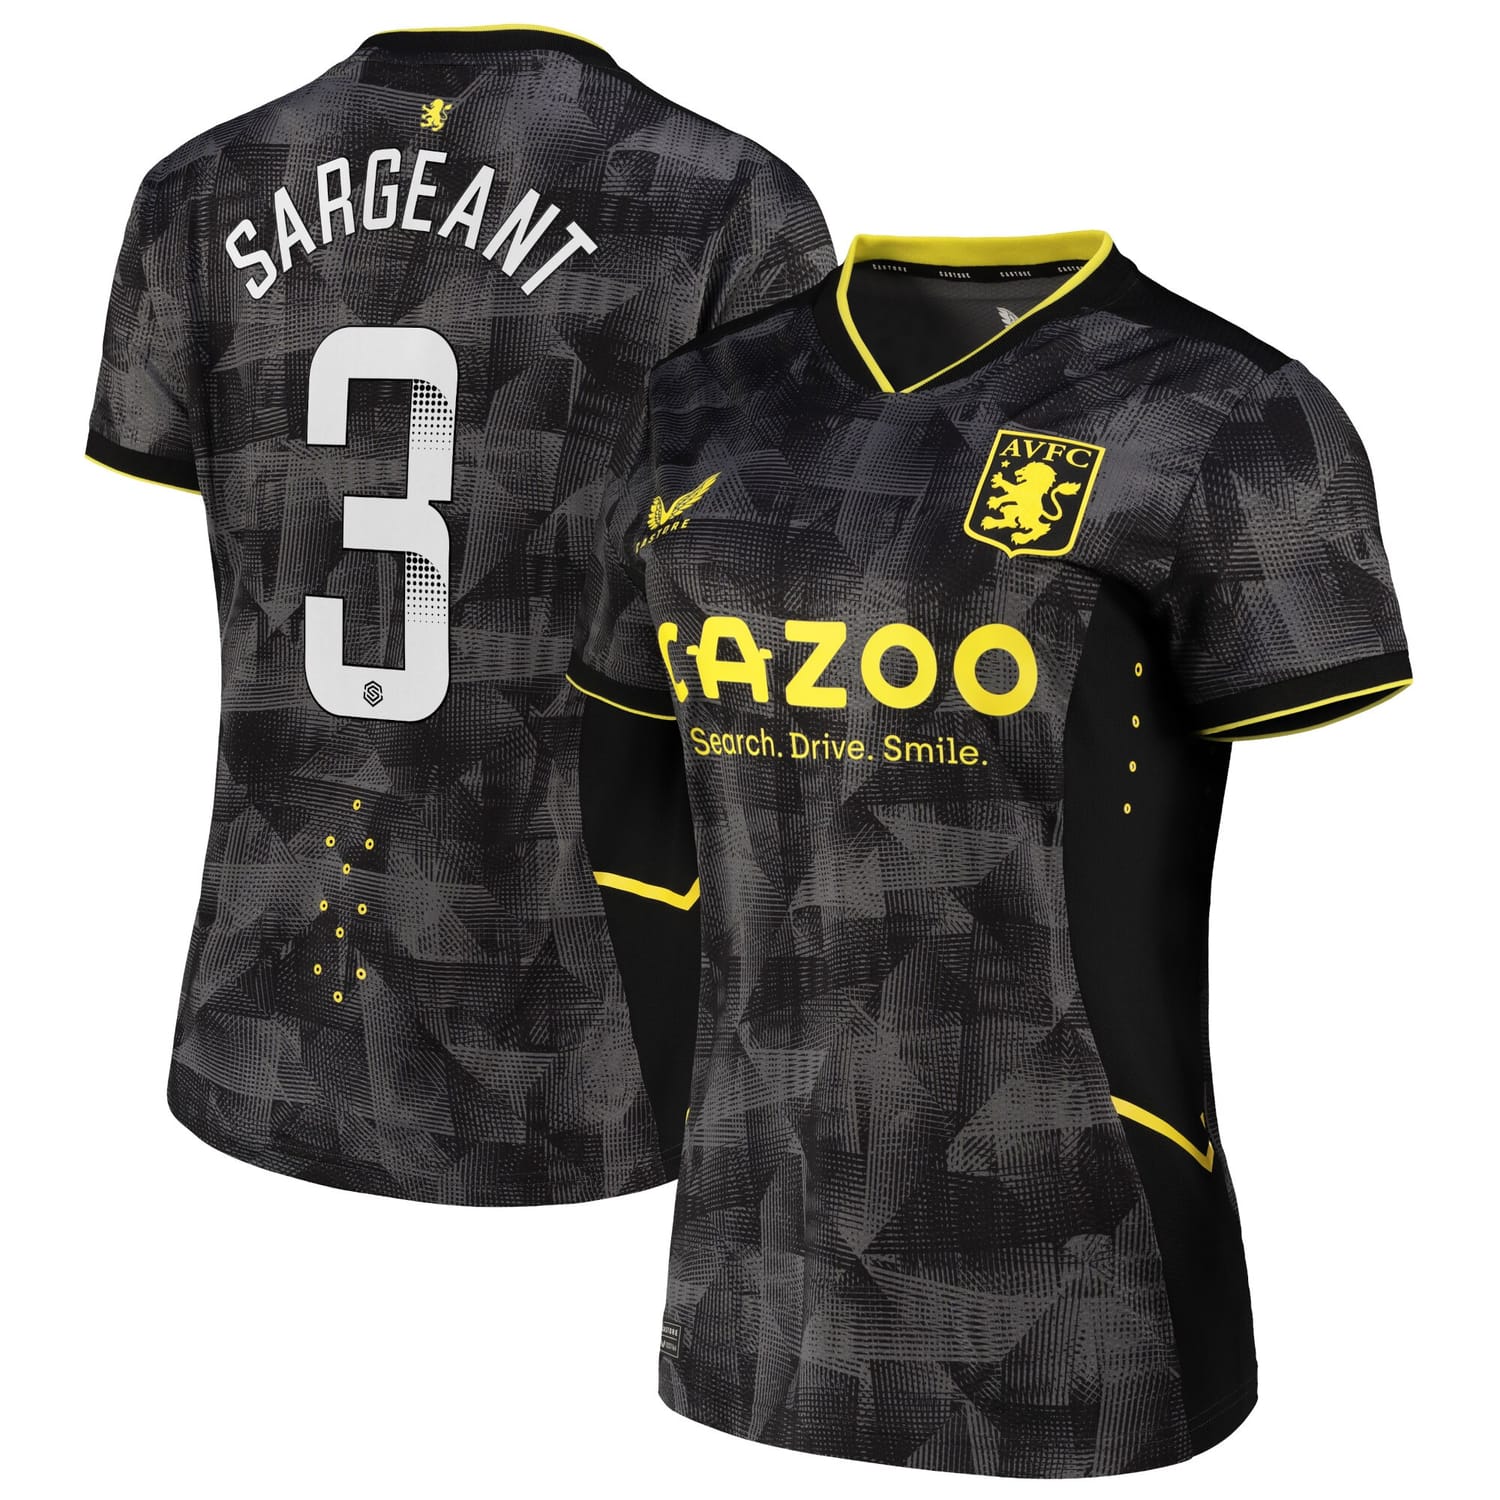 Premier League Aston Villa Third WSL Pro Jersey Shirt 2022-23 player Meaghan Sargeant 3 printing for Women